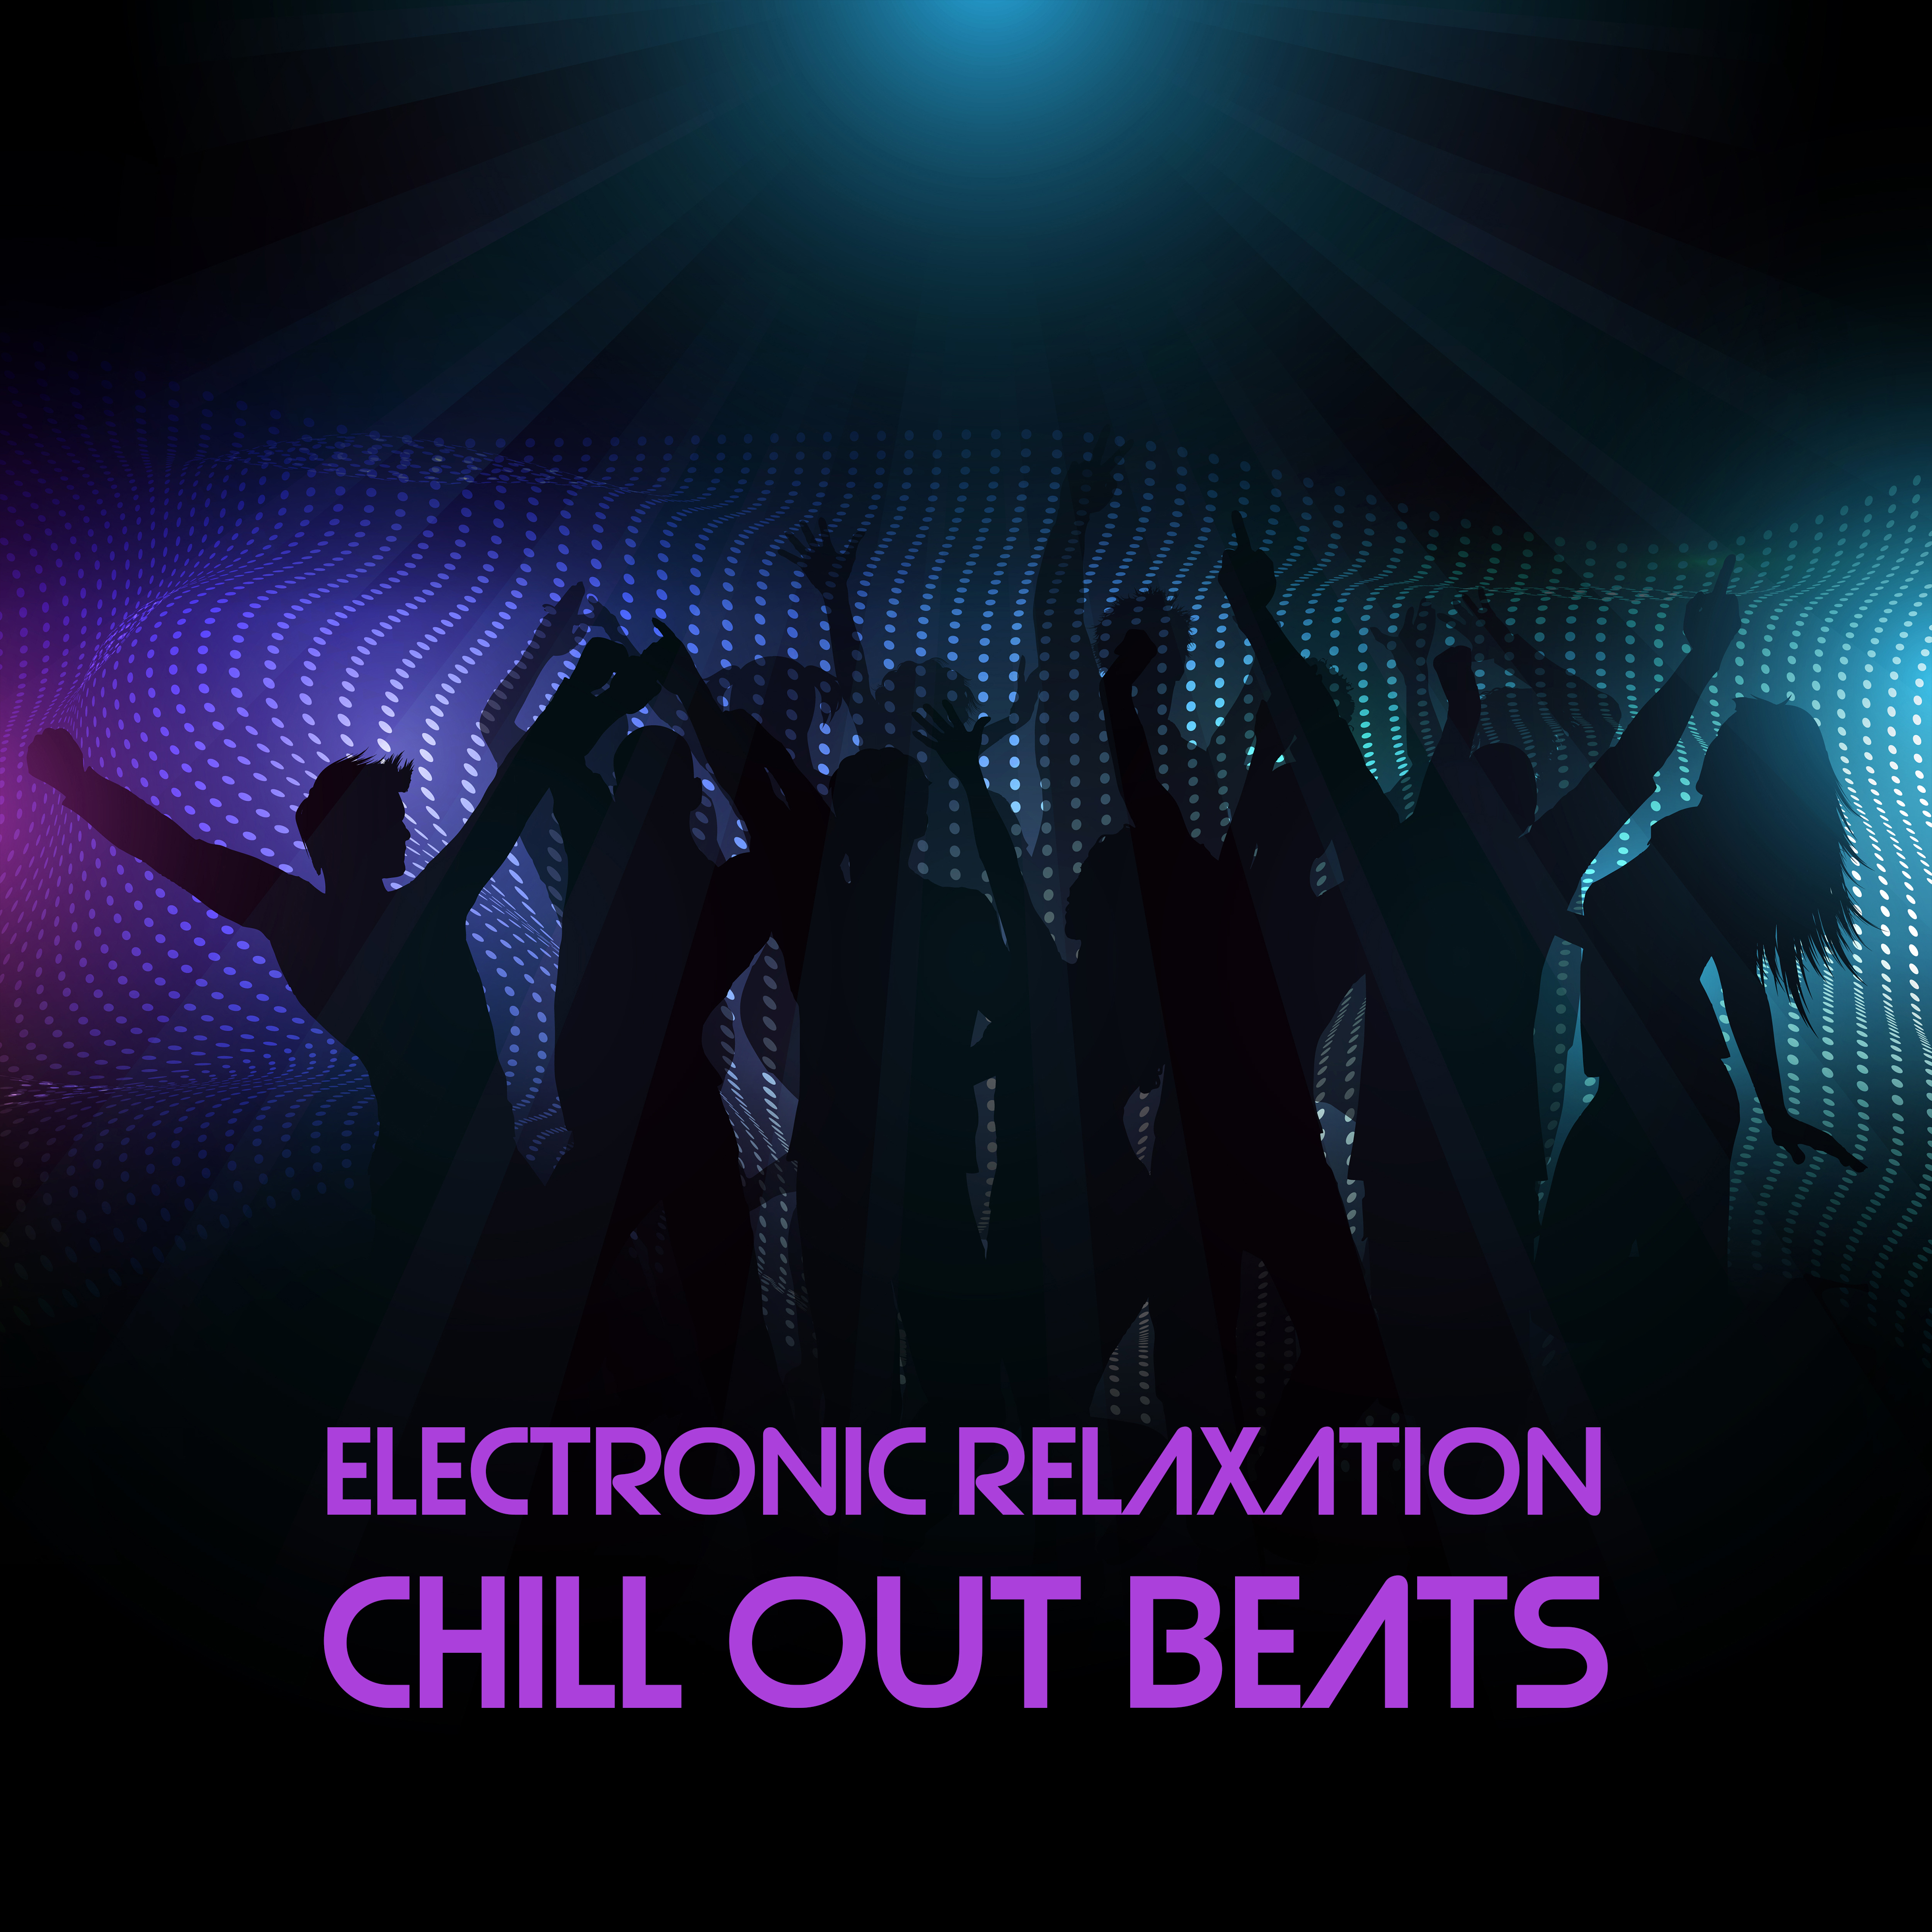 Electronic Relaxation Chill Out Beats